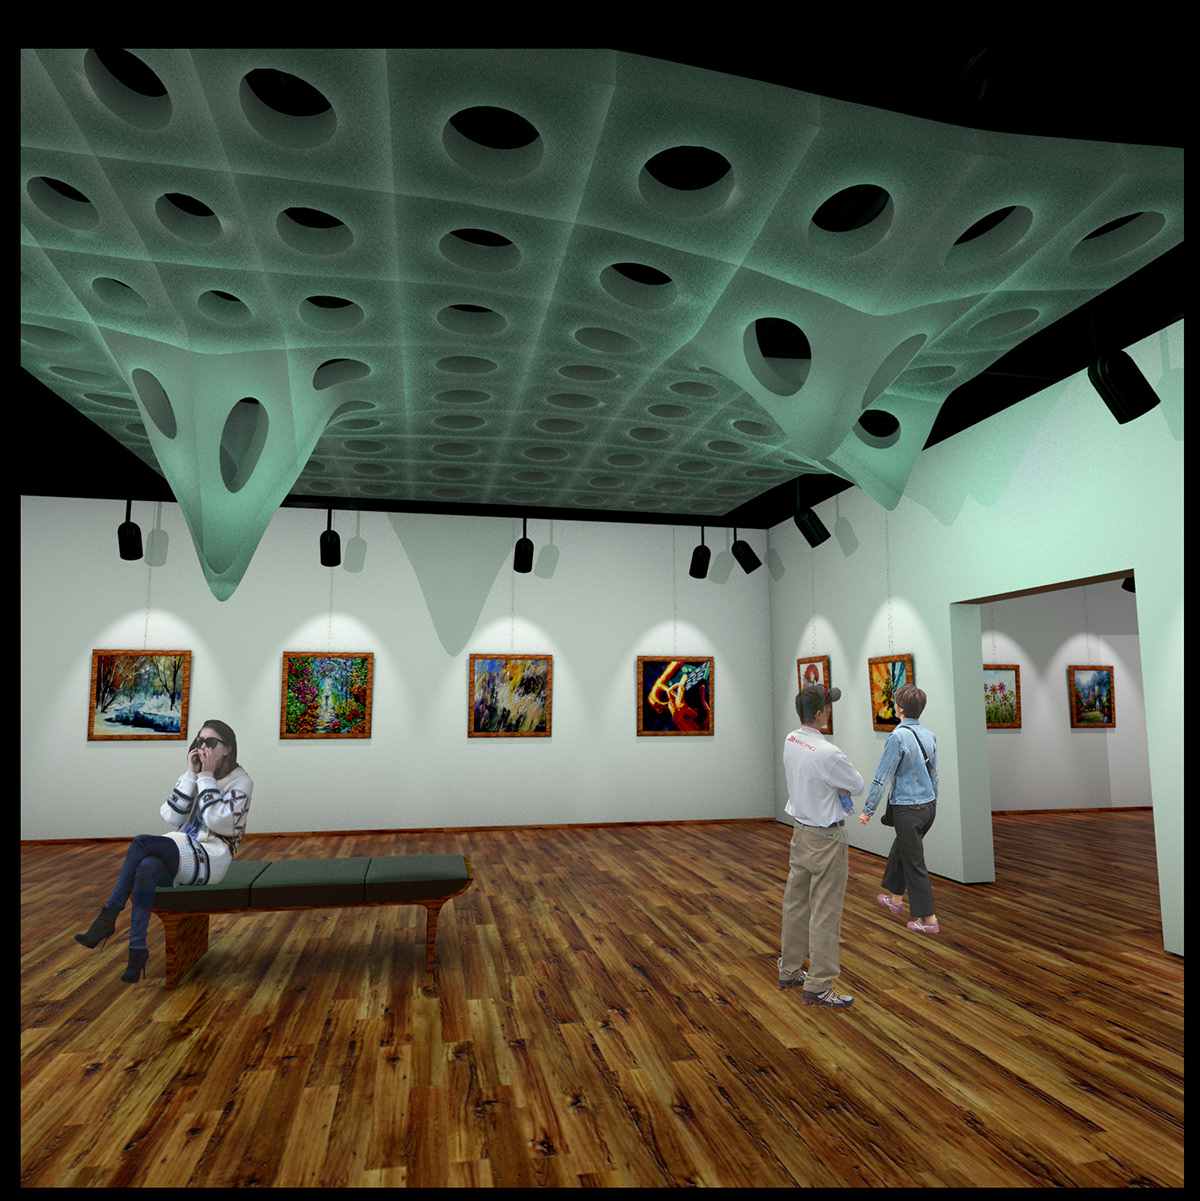 Movable Ceiling Art Gallery  exhibition space interactive architecture Dynamic Architecture